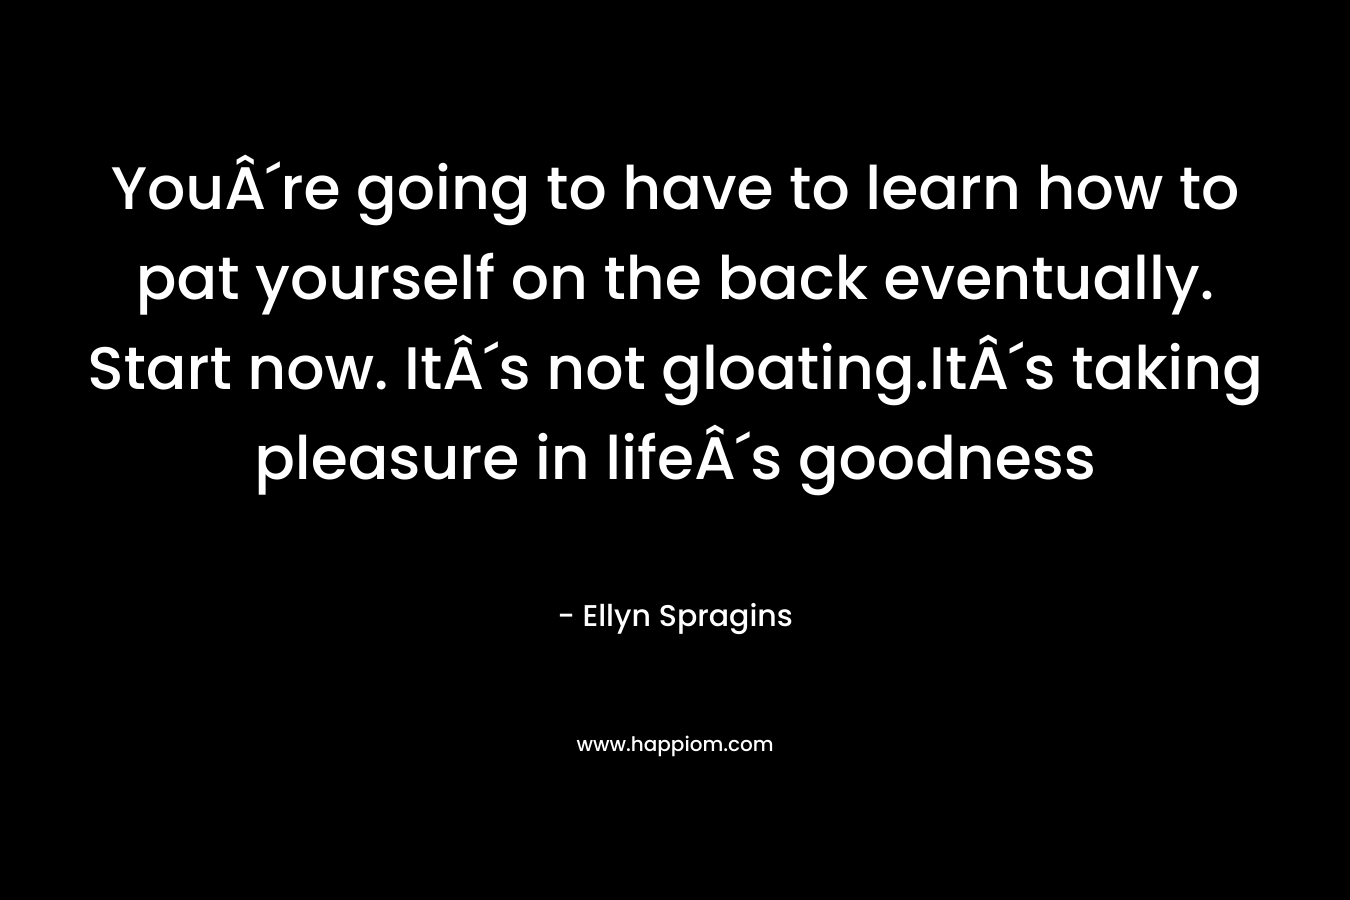 YouÂ´re going to have to learn how to pat yourself on the back eventually. Start now. ItÂ´s not gloating.ItÂ´s taking pleasure in lifeÂ´s goodness